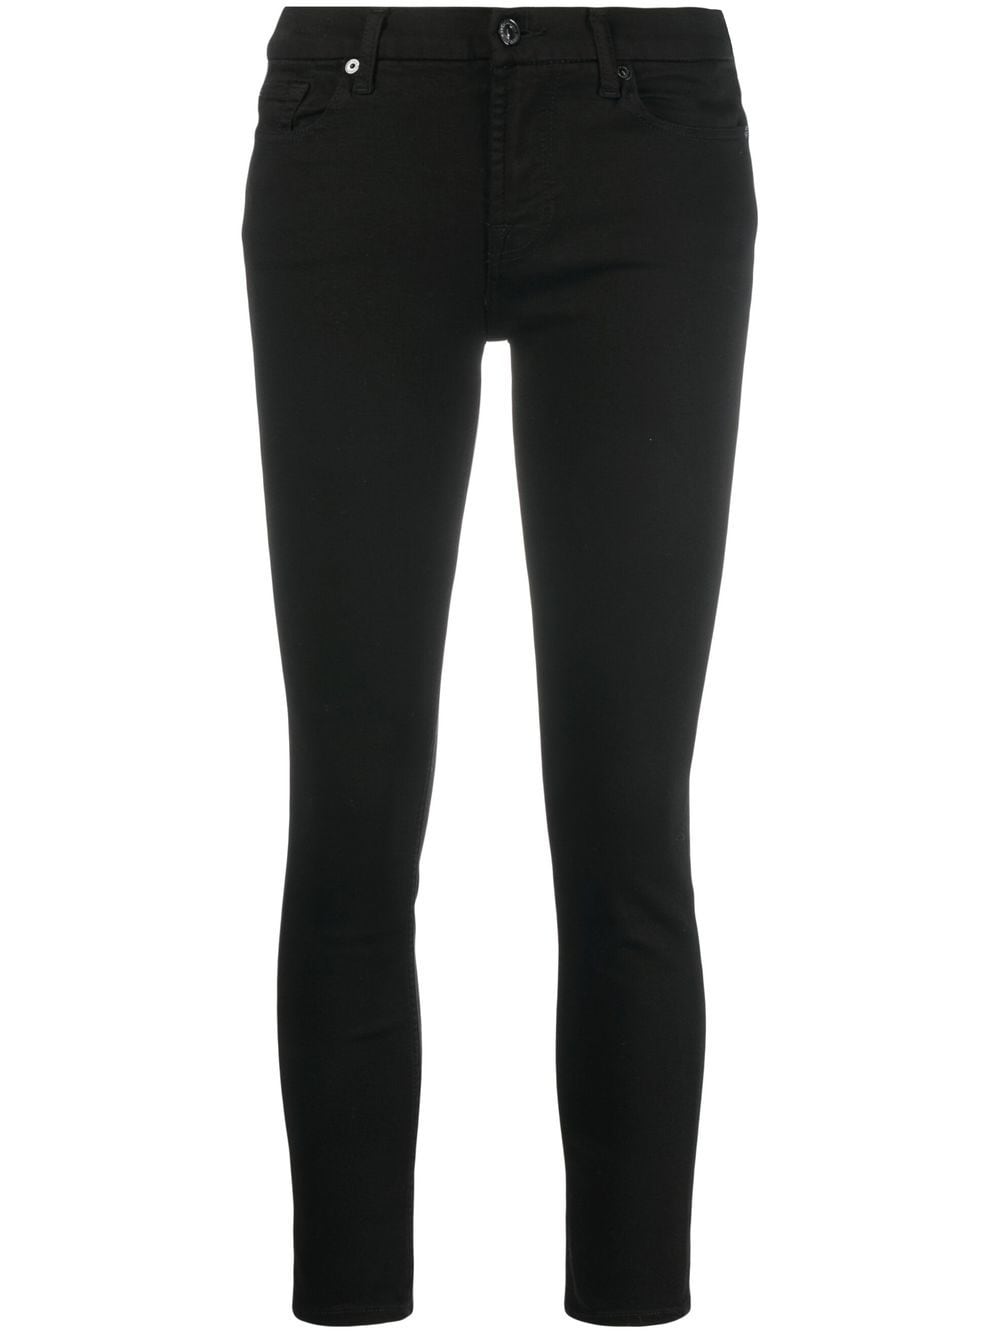 7 For All Mankind mid-rise skinny jeans - Black von 7 For All Mankind